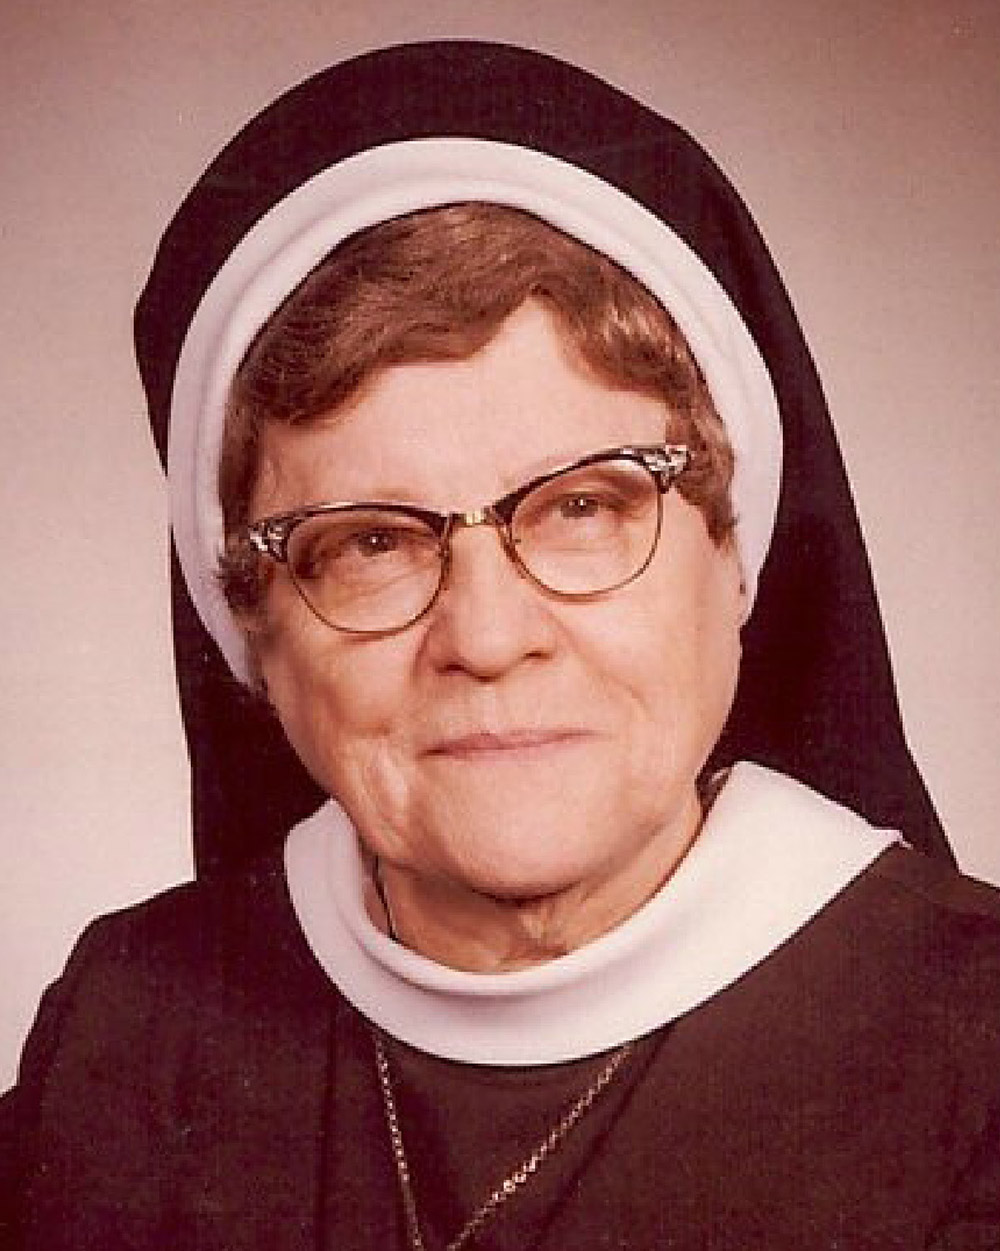 Sister-Mary-Rose-Stecz-OSF-1910-2002